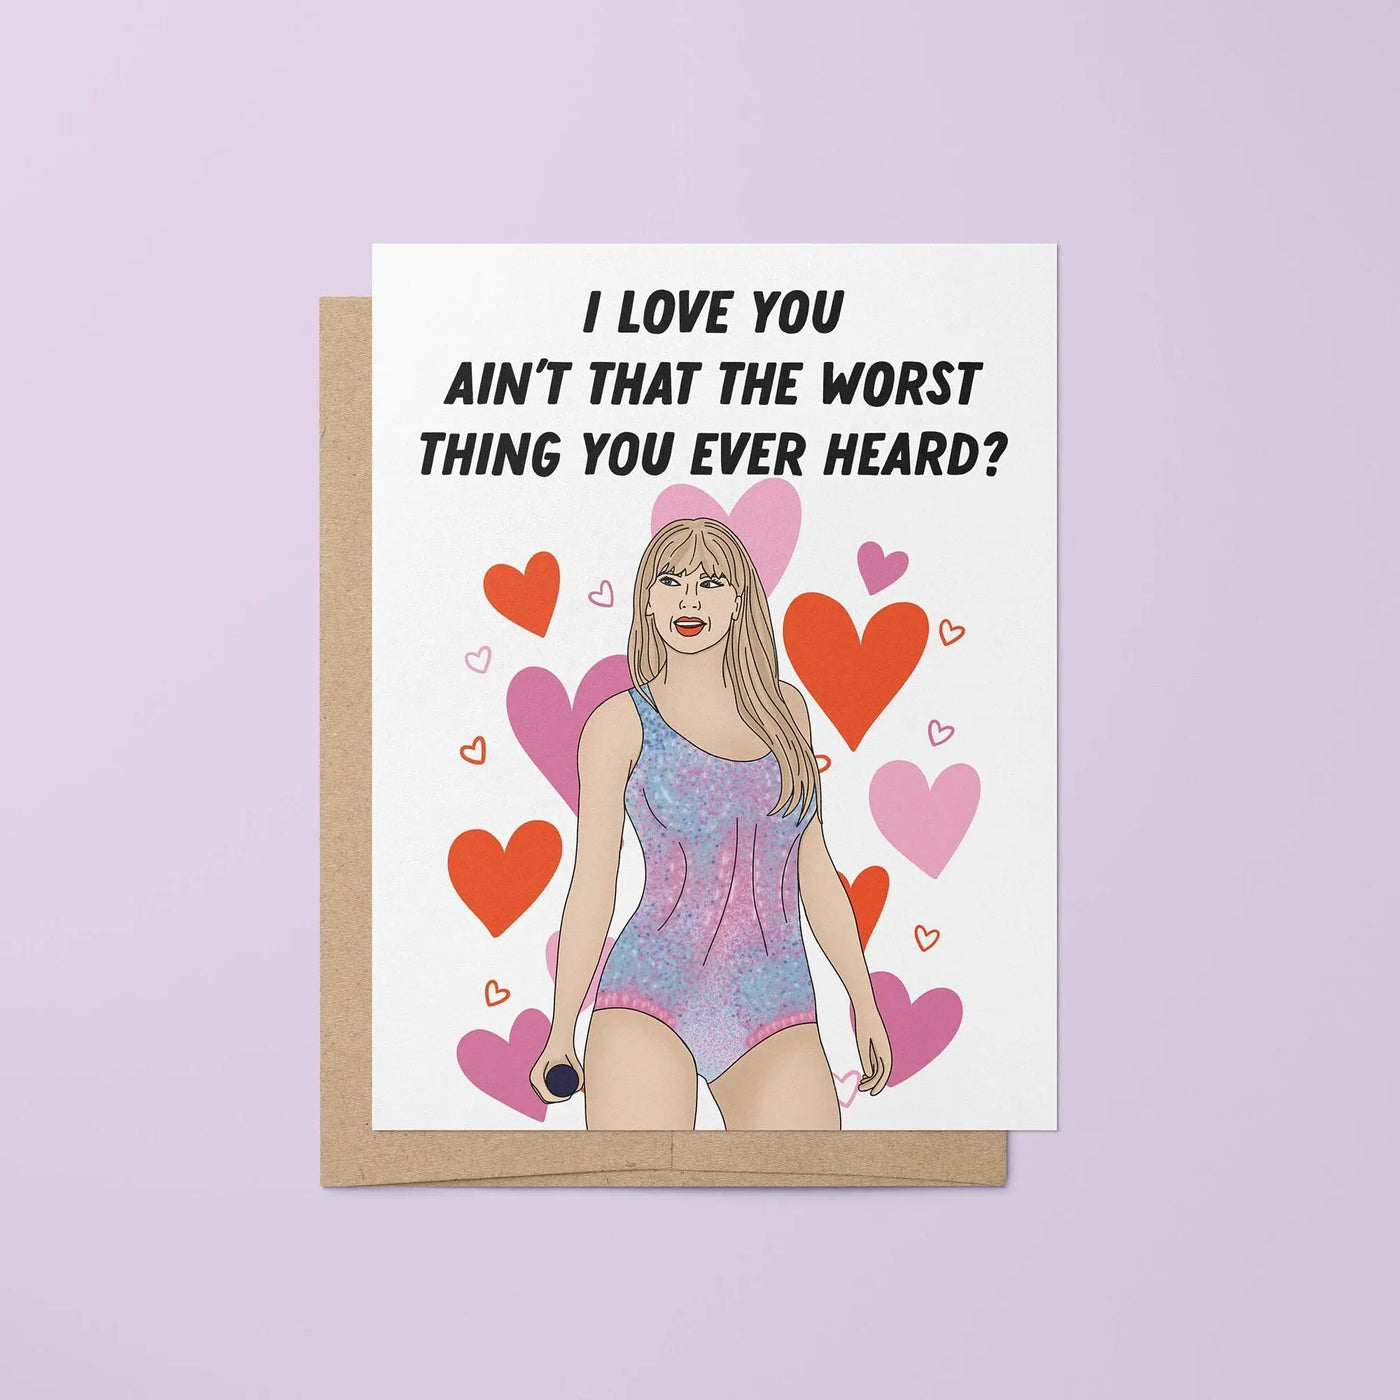 I love you ain't that the worst thing you've ever heard greeting card MangoIllustrated